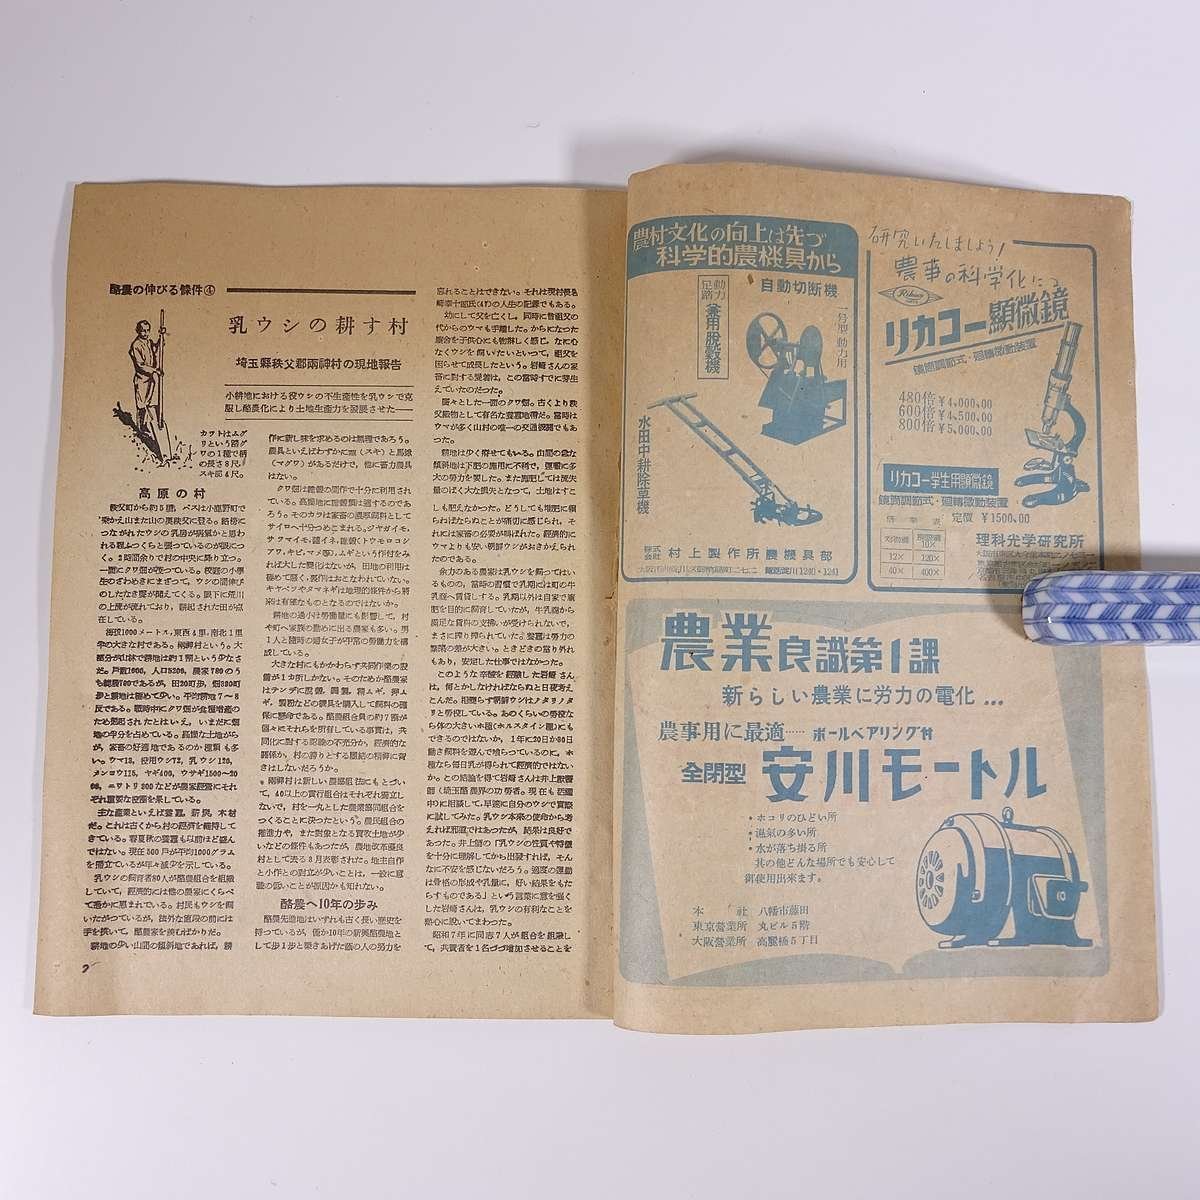  agriculture morning by day volume no. 29 number 1948/5 morning day newspaper Tokyo head office Showa era two three year 1948 old book magazine agriculture agriculture agriculture house special collection *.. beforehand break up present to demand another 